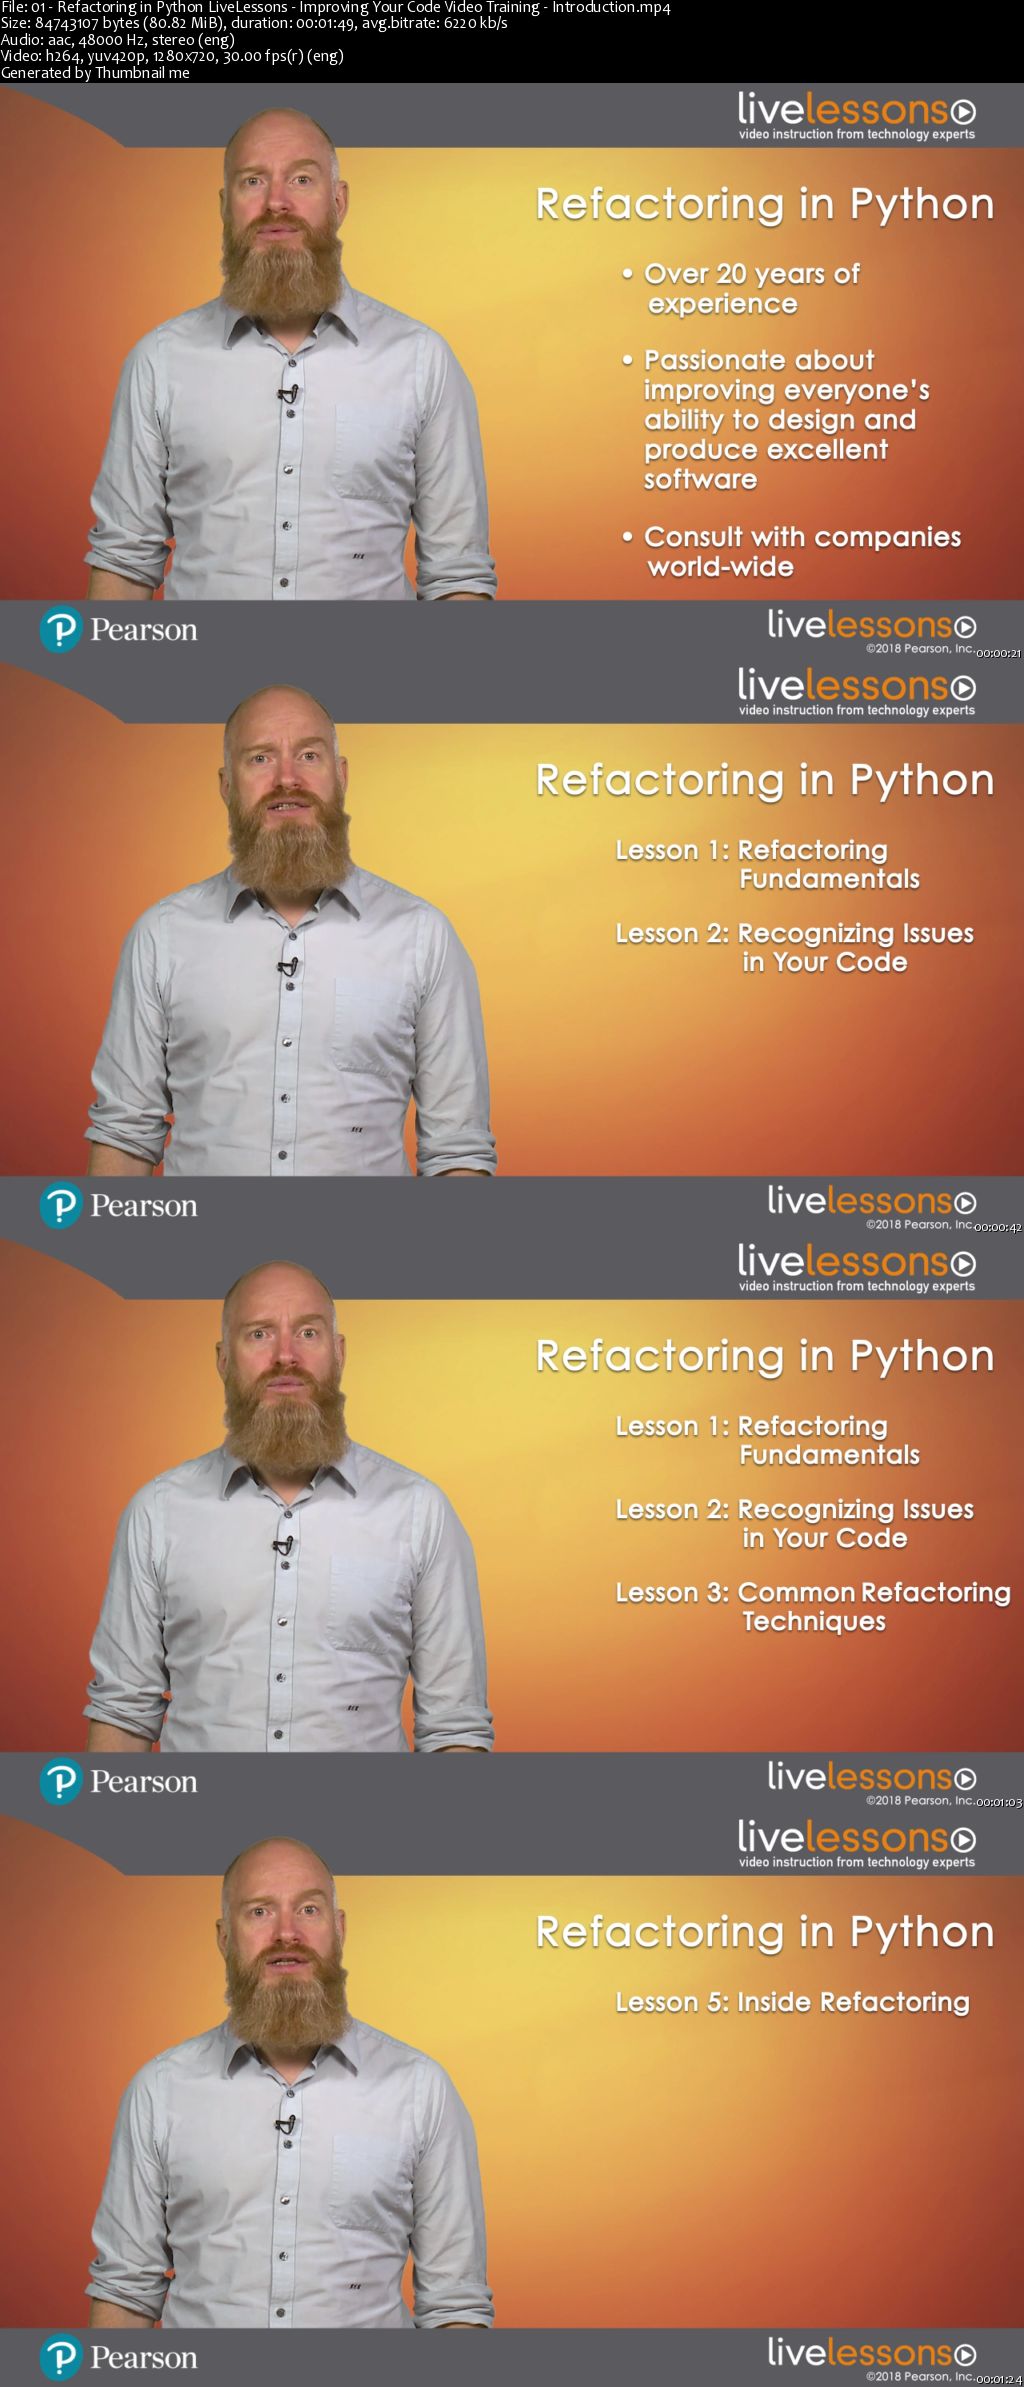 Refactoring in Python LiveLessons: Improving Your Code Video Training